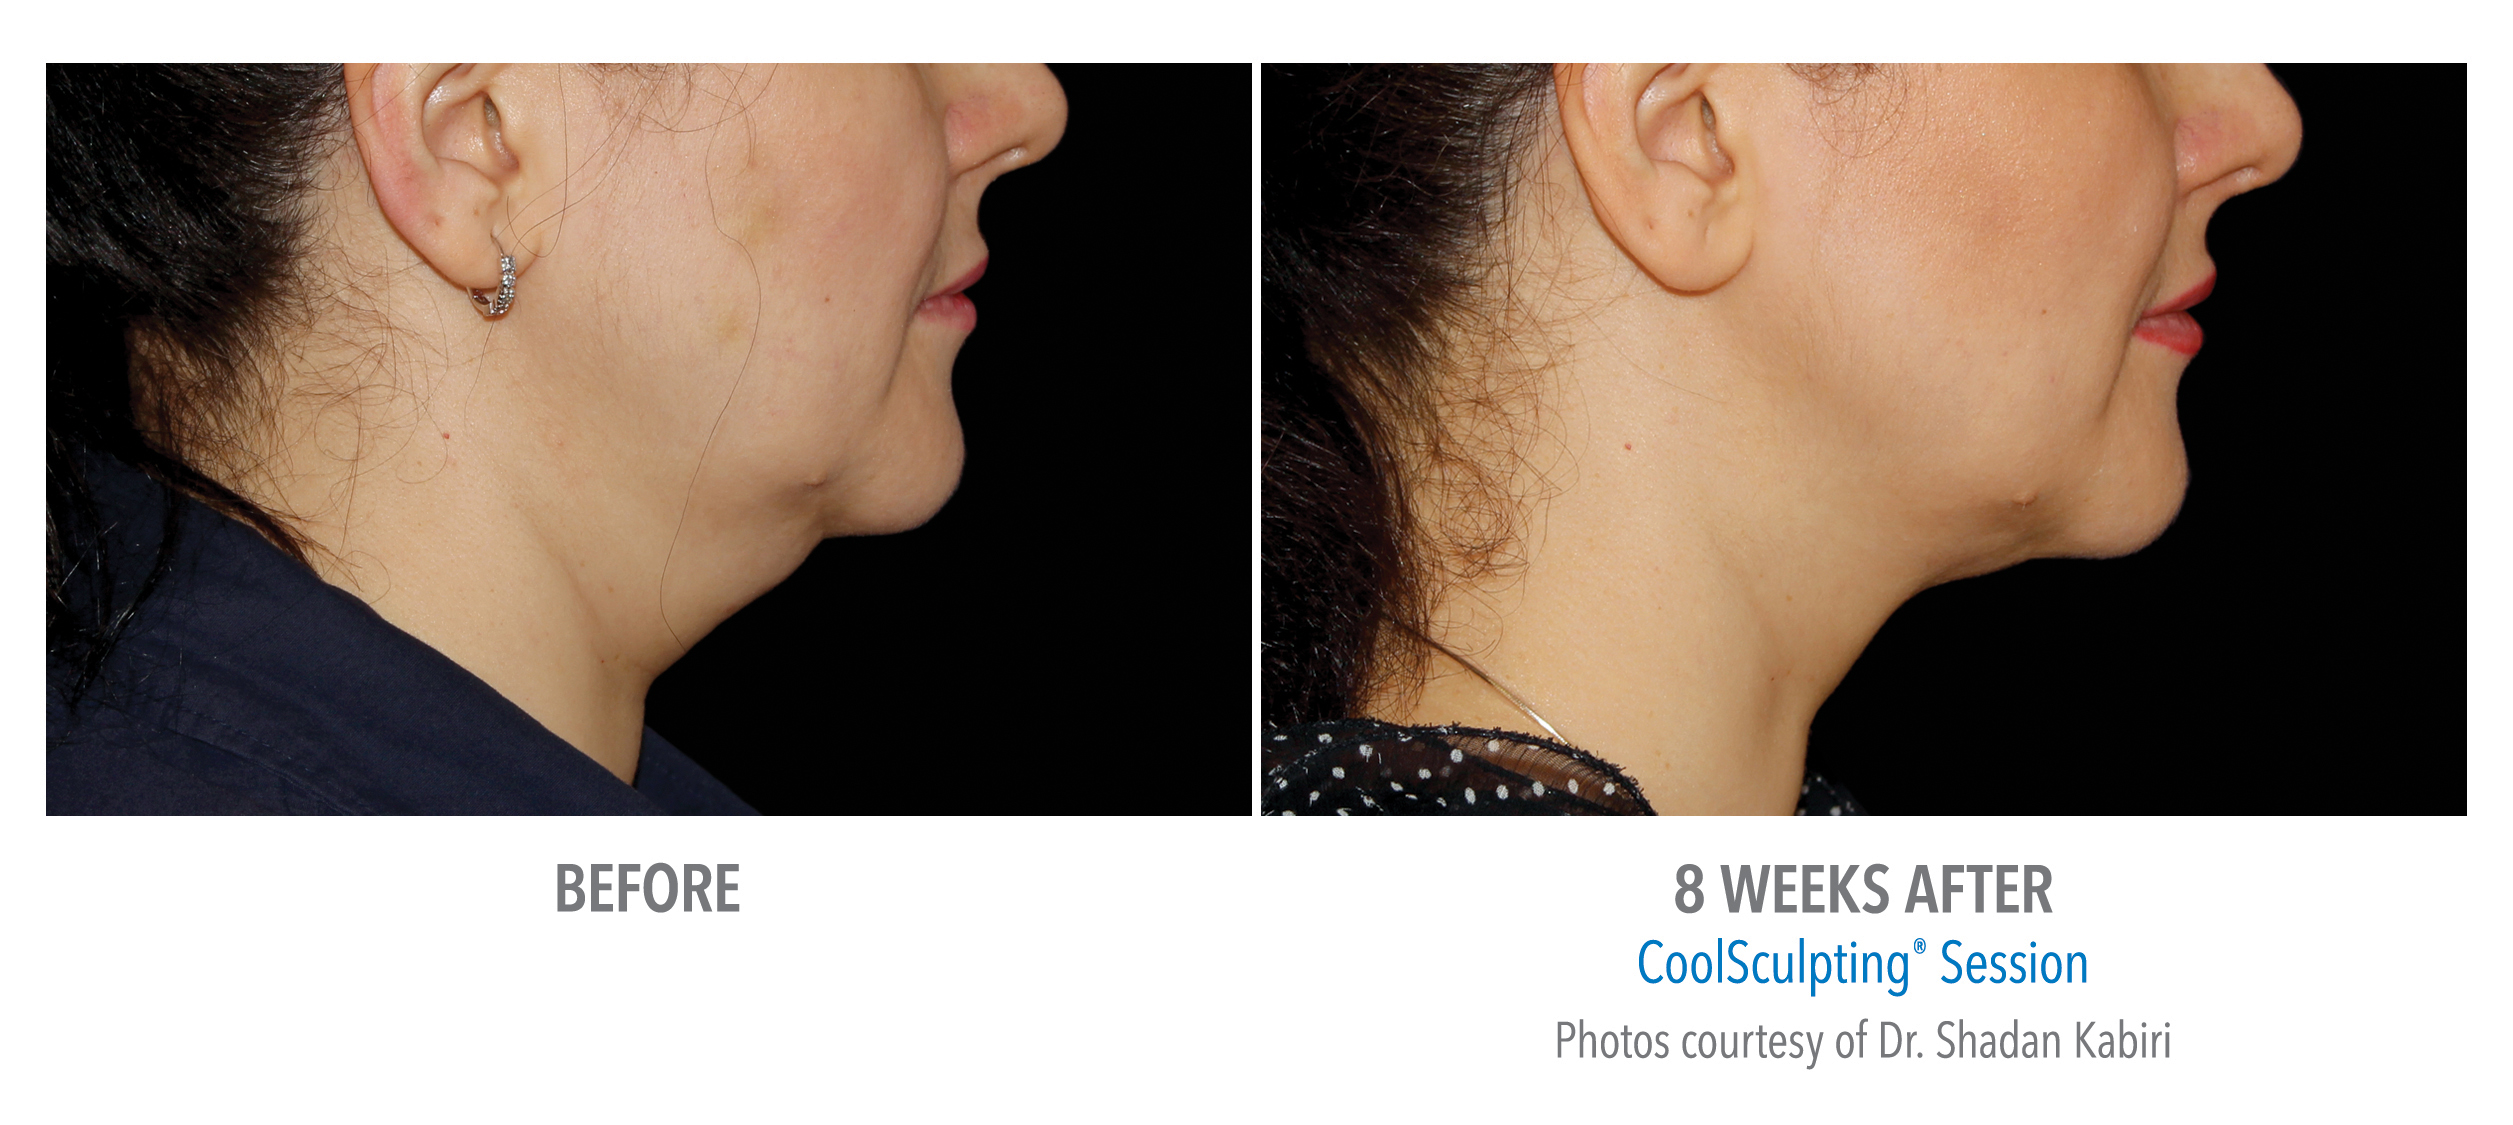 CoolSculpting Before & After Photos | Chin 8